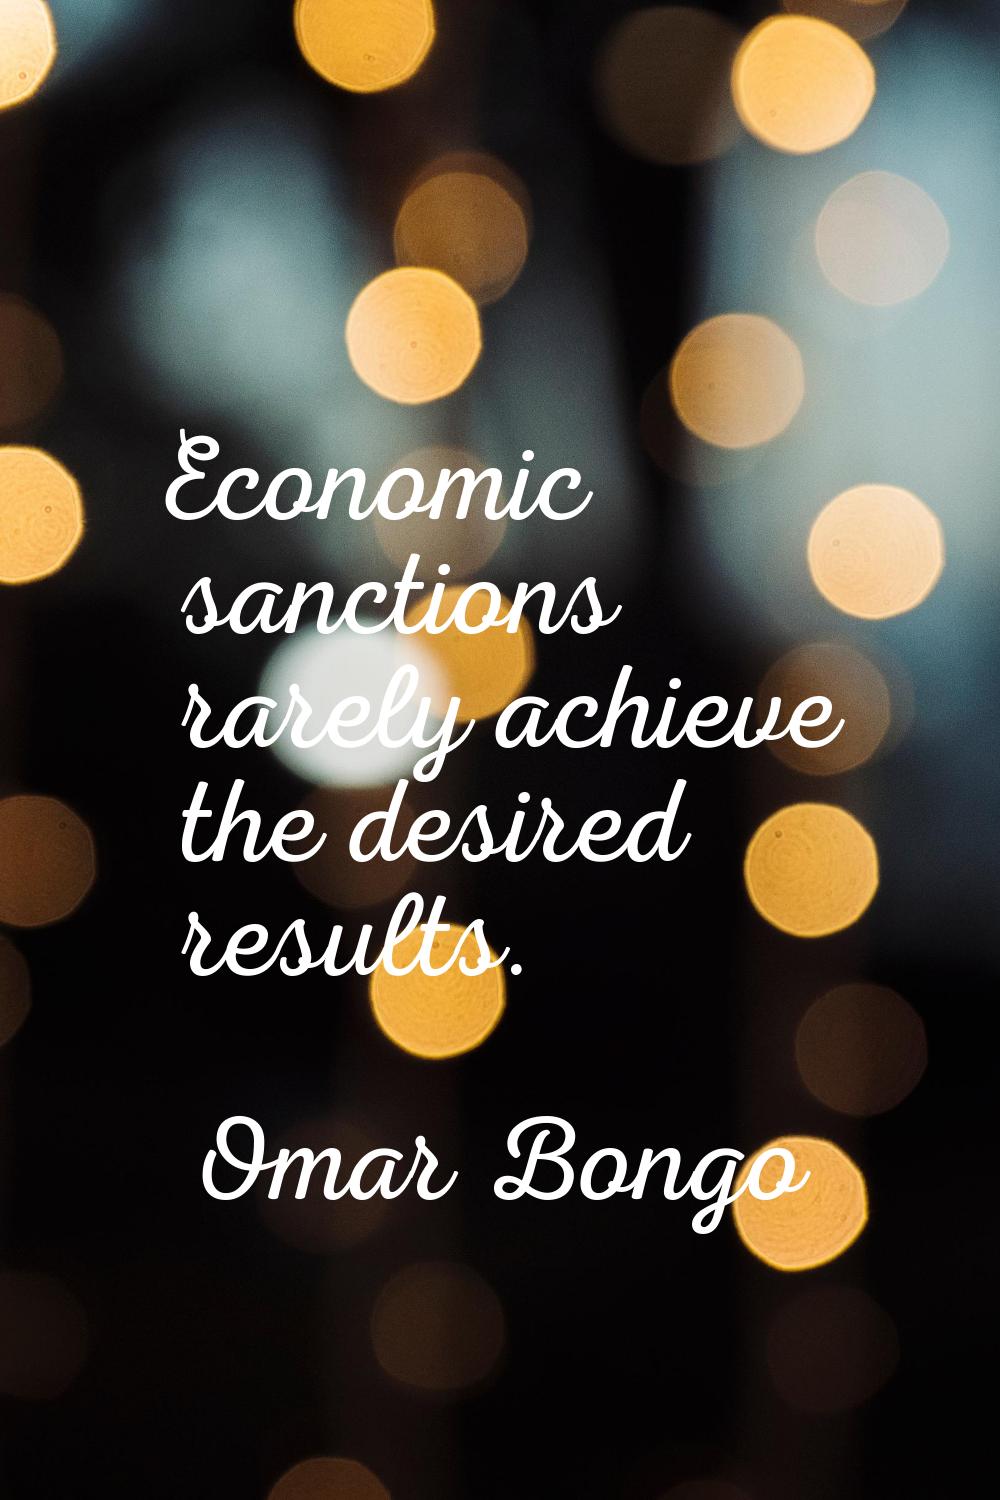 Economic sanctions rarely achieve the desired results.